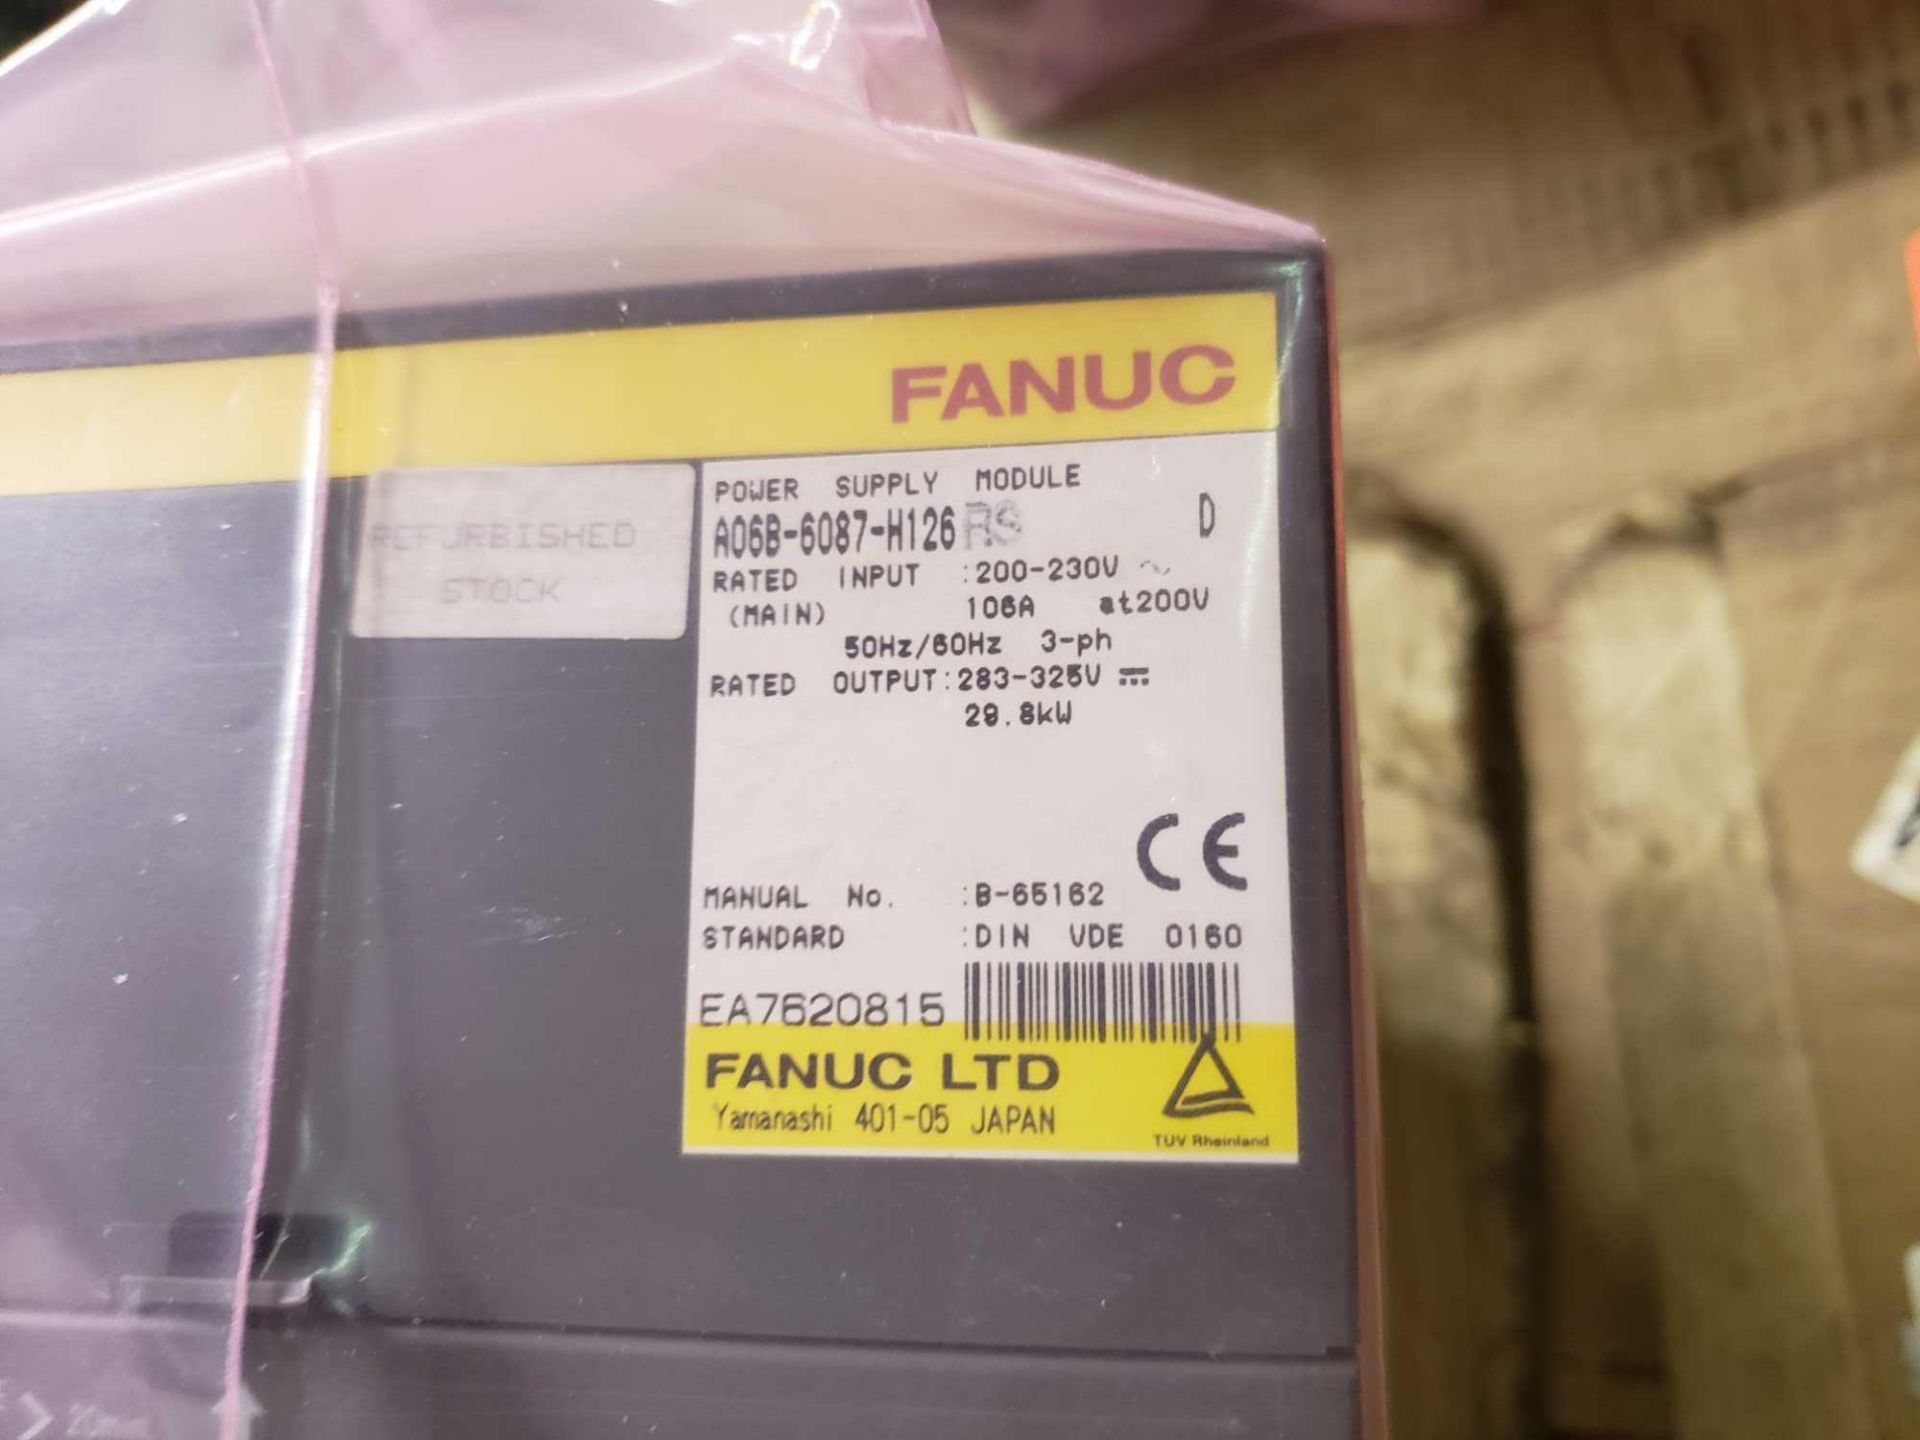 Fanuc Power Supply Module model A06B-6087-H126. New in antistatic plastic and box. - Image 2 of 2